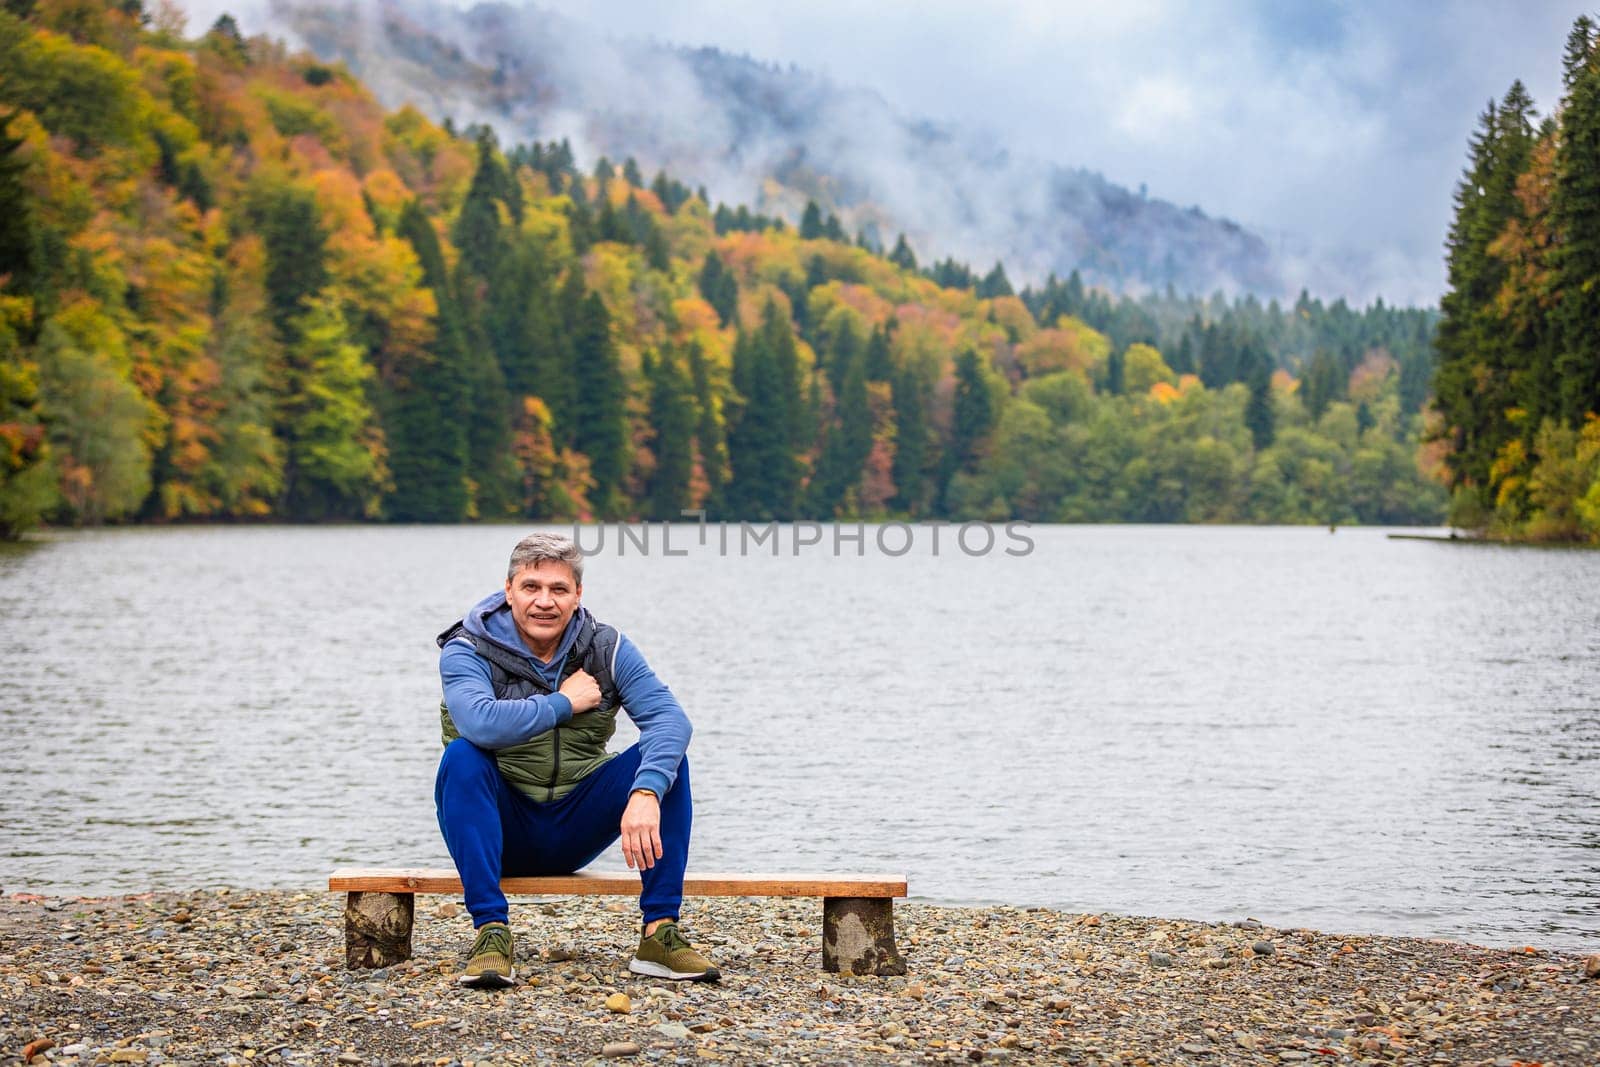 The man admires the picturesque landscapes by the lake in the mountains, surrounded by the beauty of nature and the comfort of the mountain landscape.